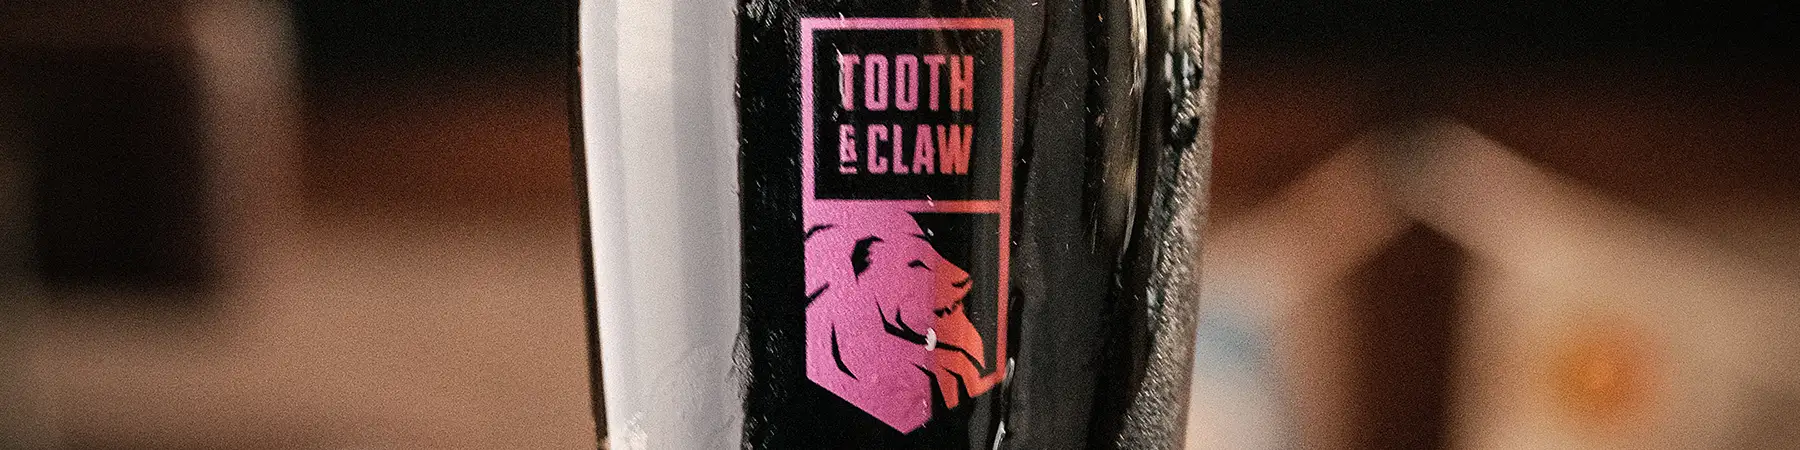 close up of tooth & claw logo on tap